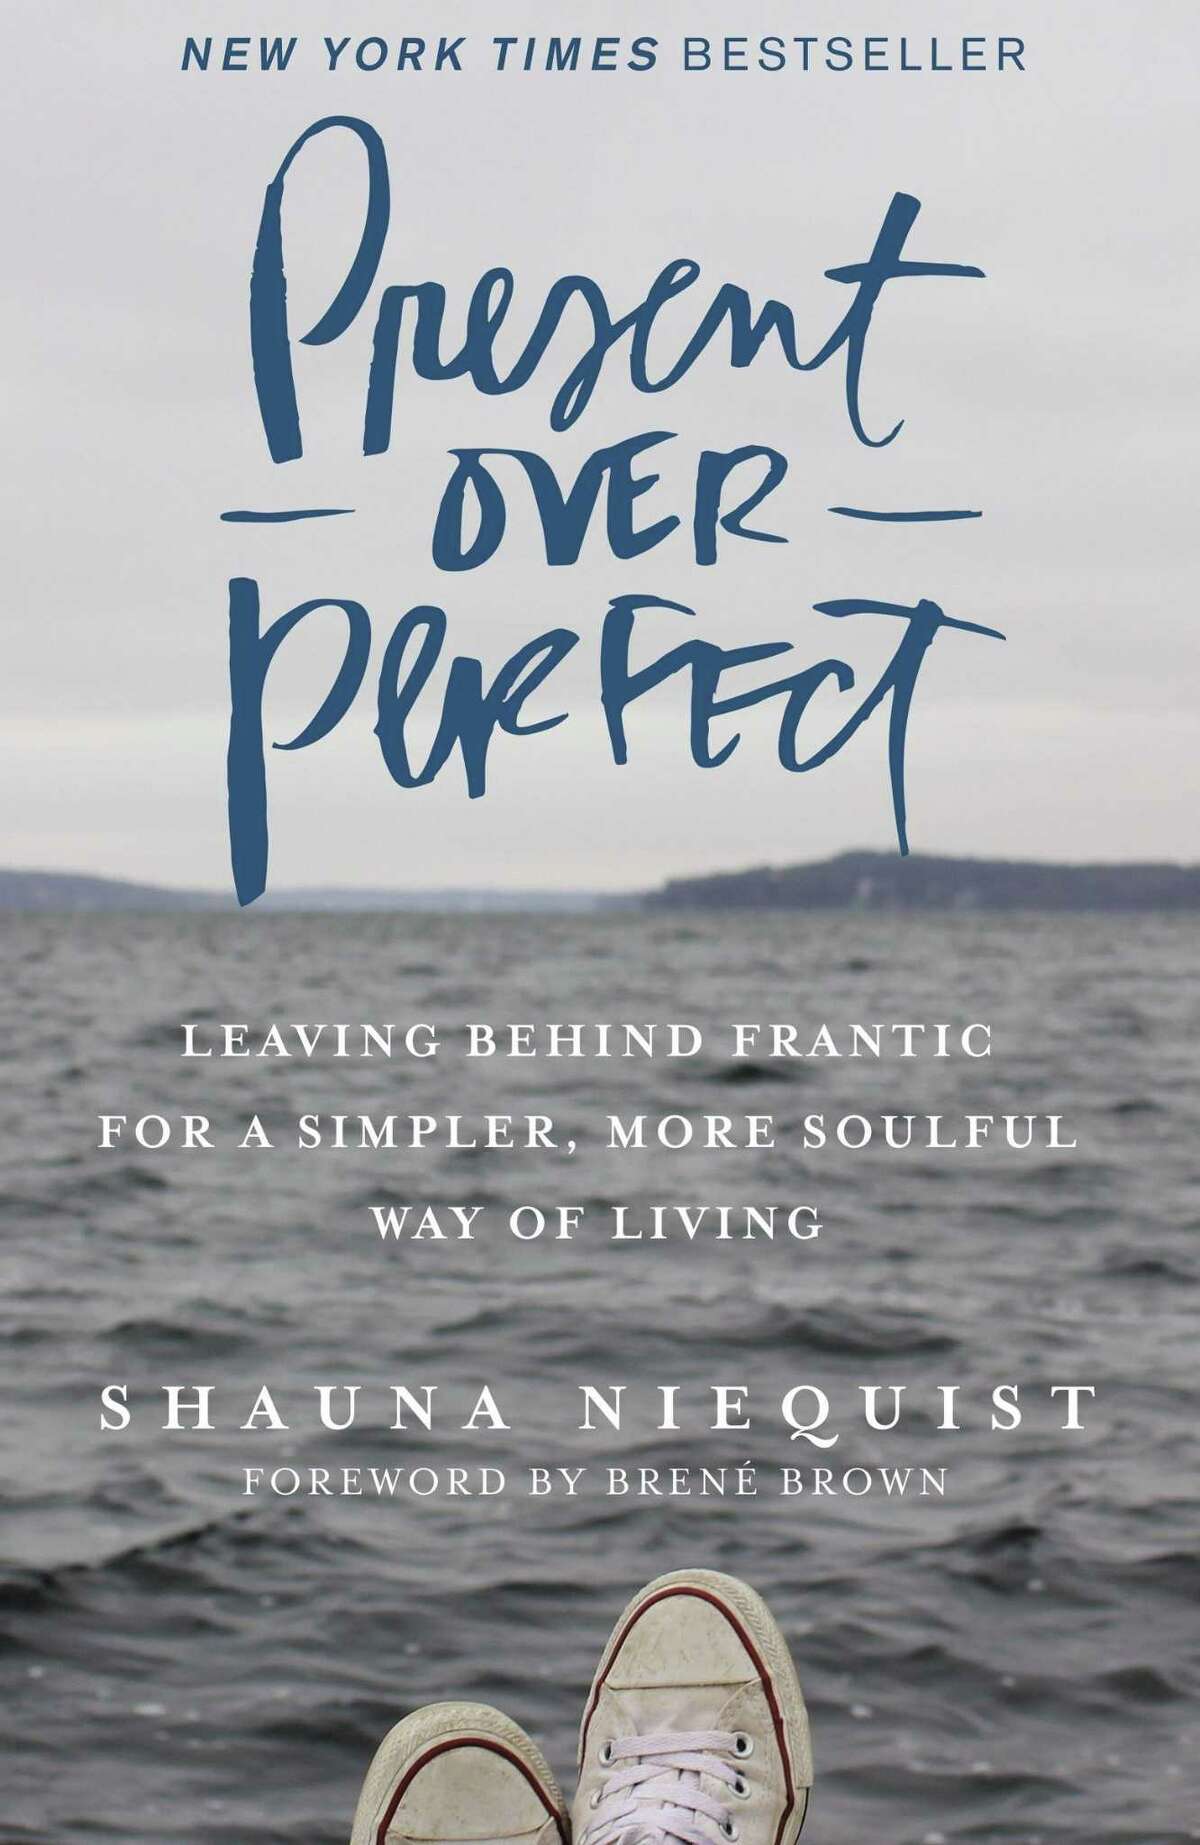 LUXE READING: Elaine Turner's pick is "Present Over Perfect" by Shauna Niequist